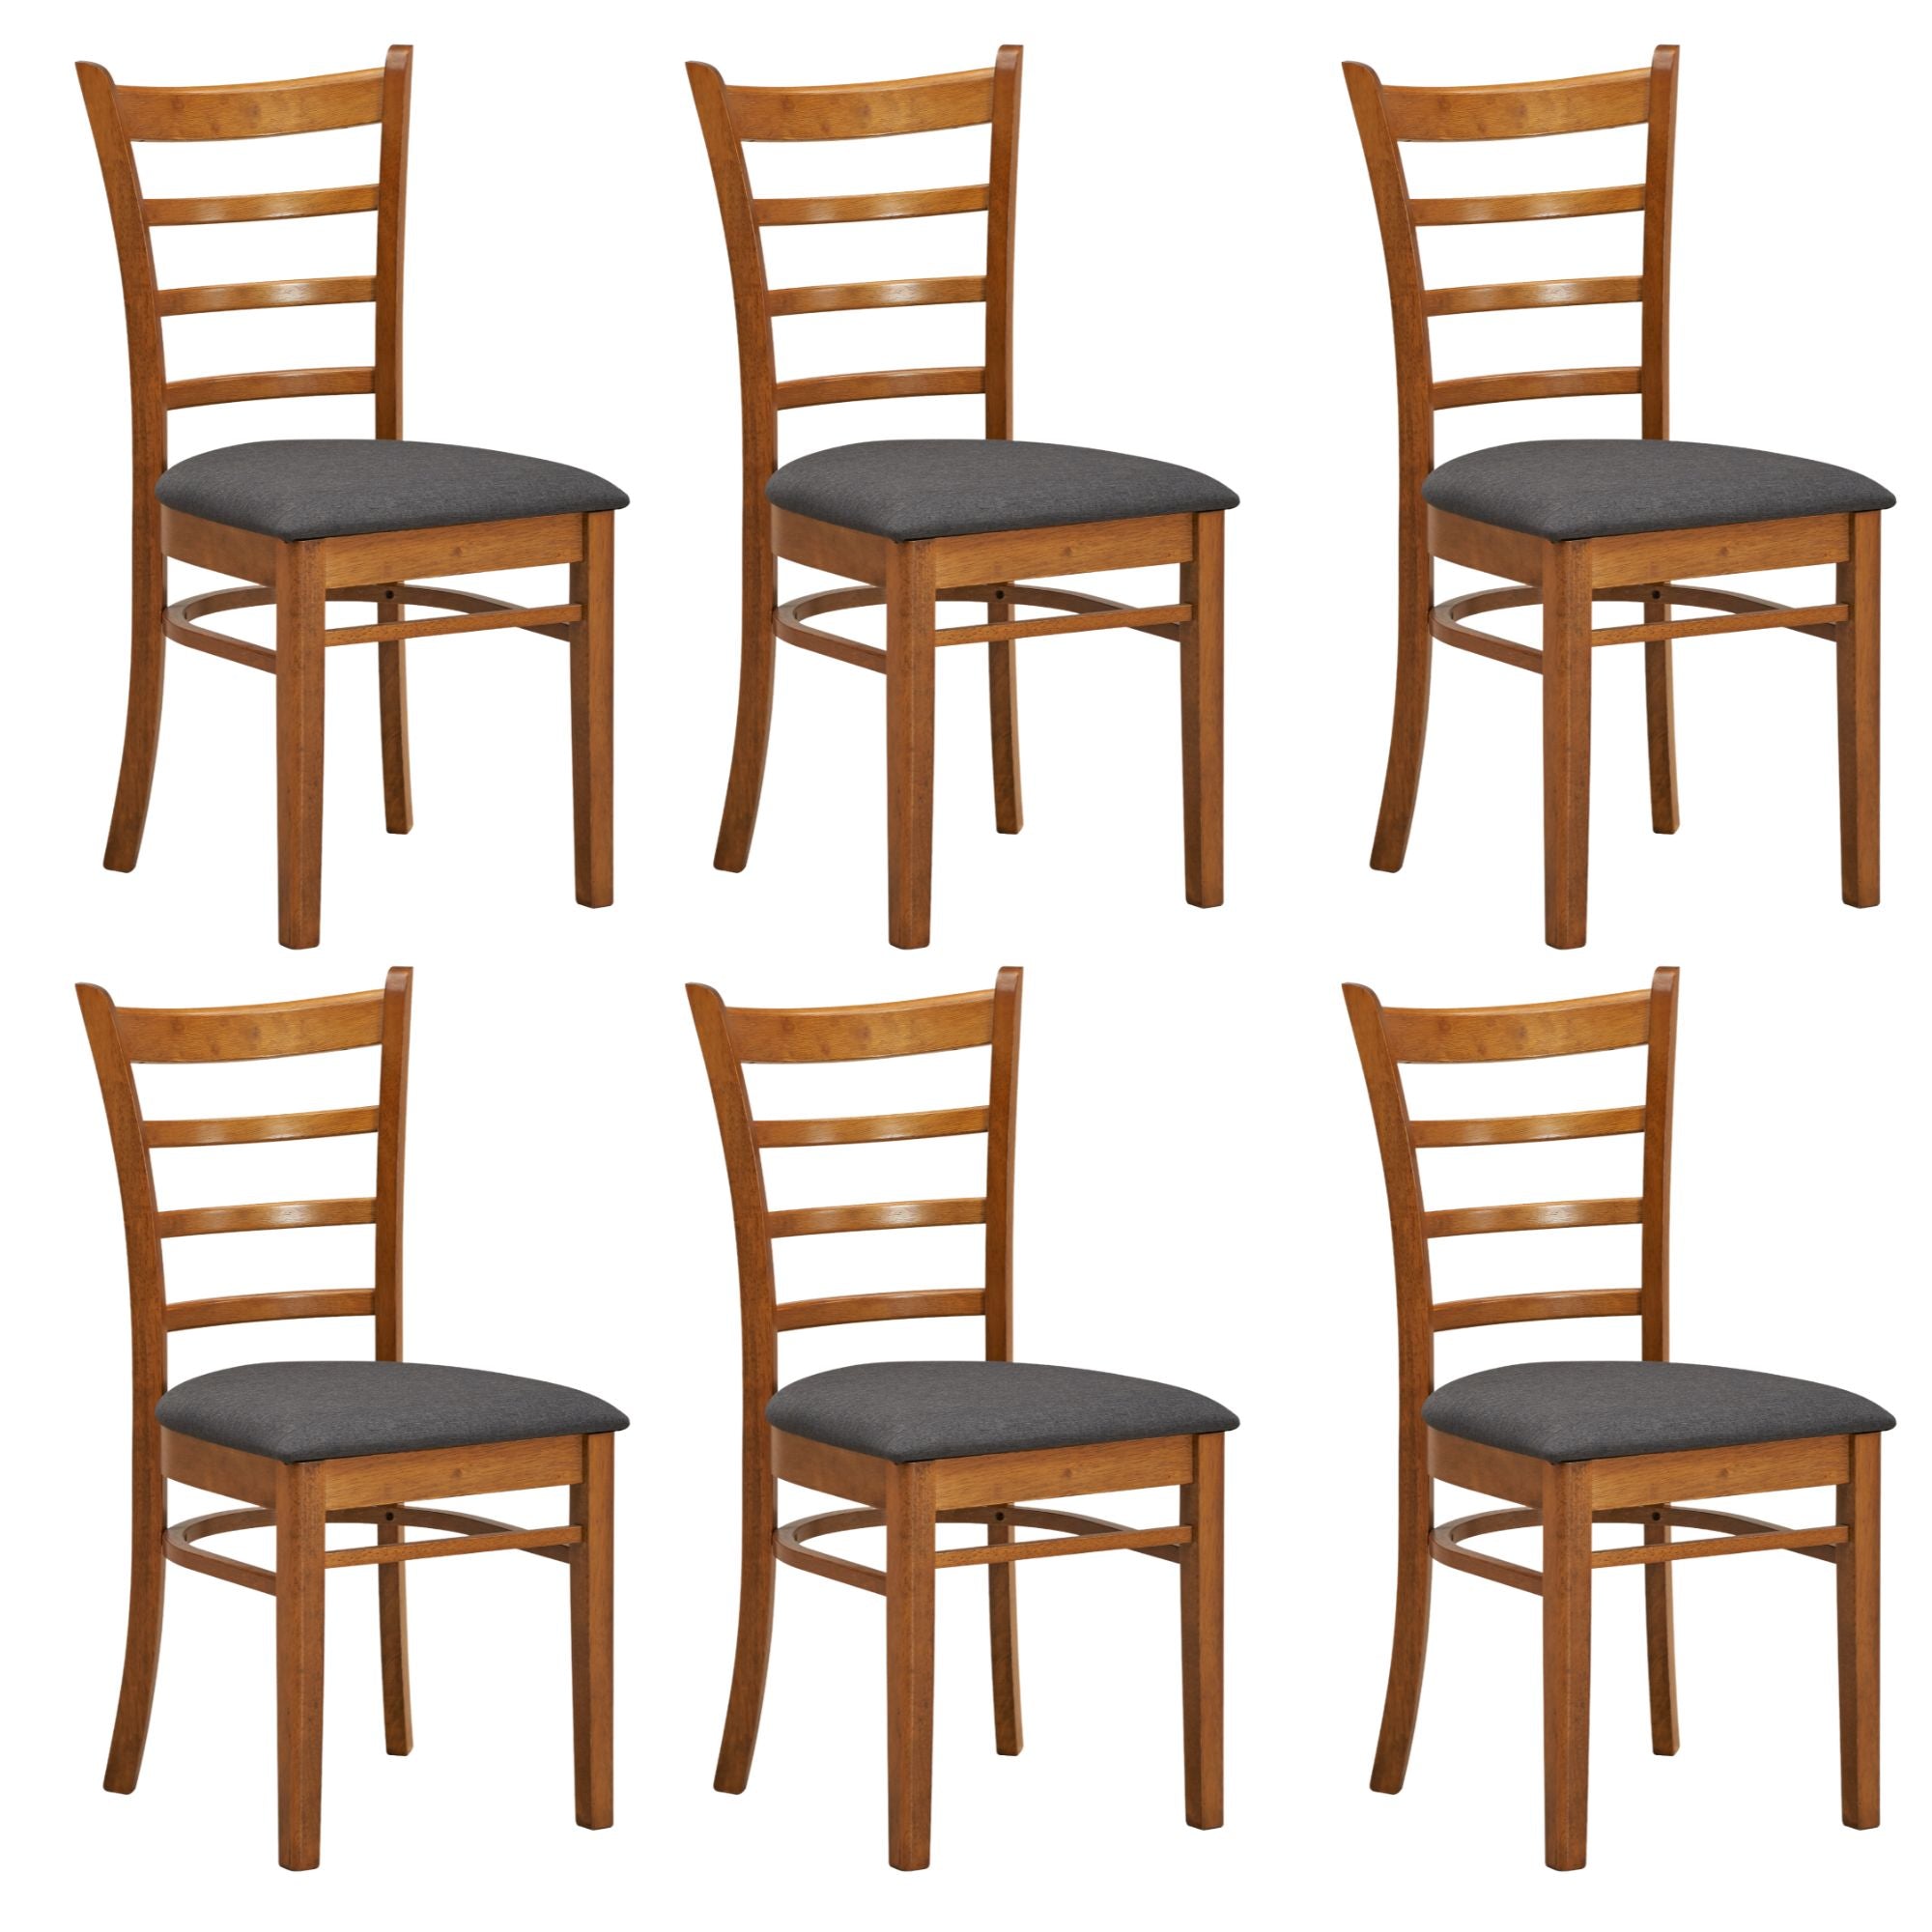 Set of 6 Crossback Solid Rubber Wood Fabric Seat - Walnut